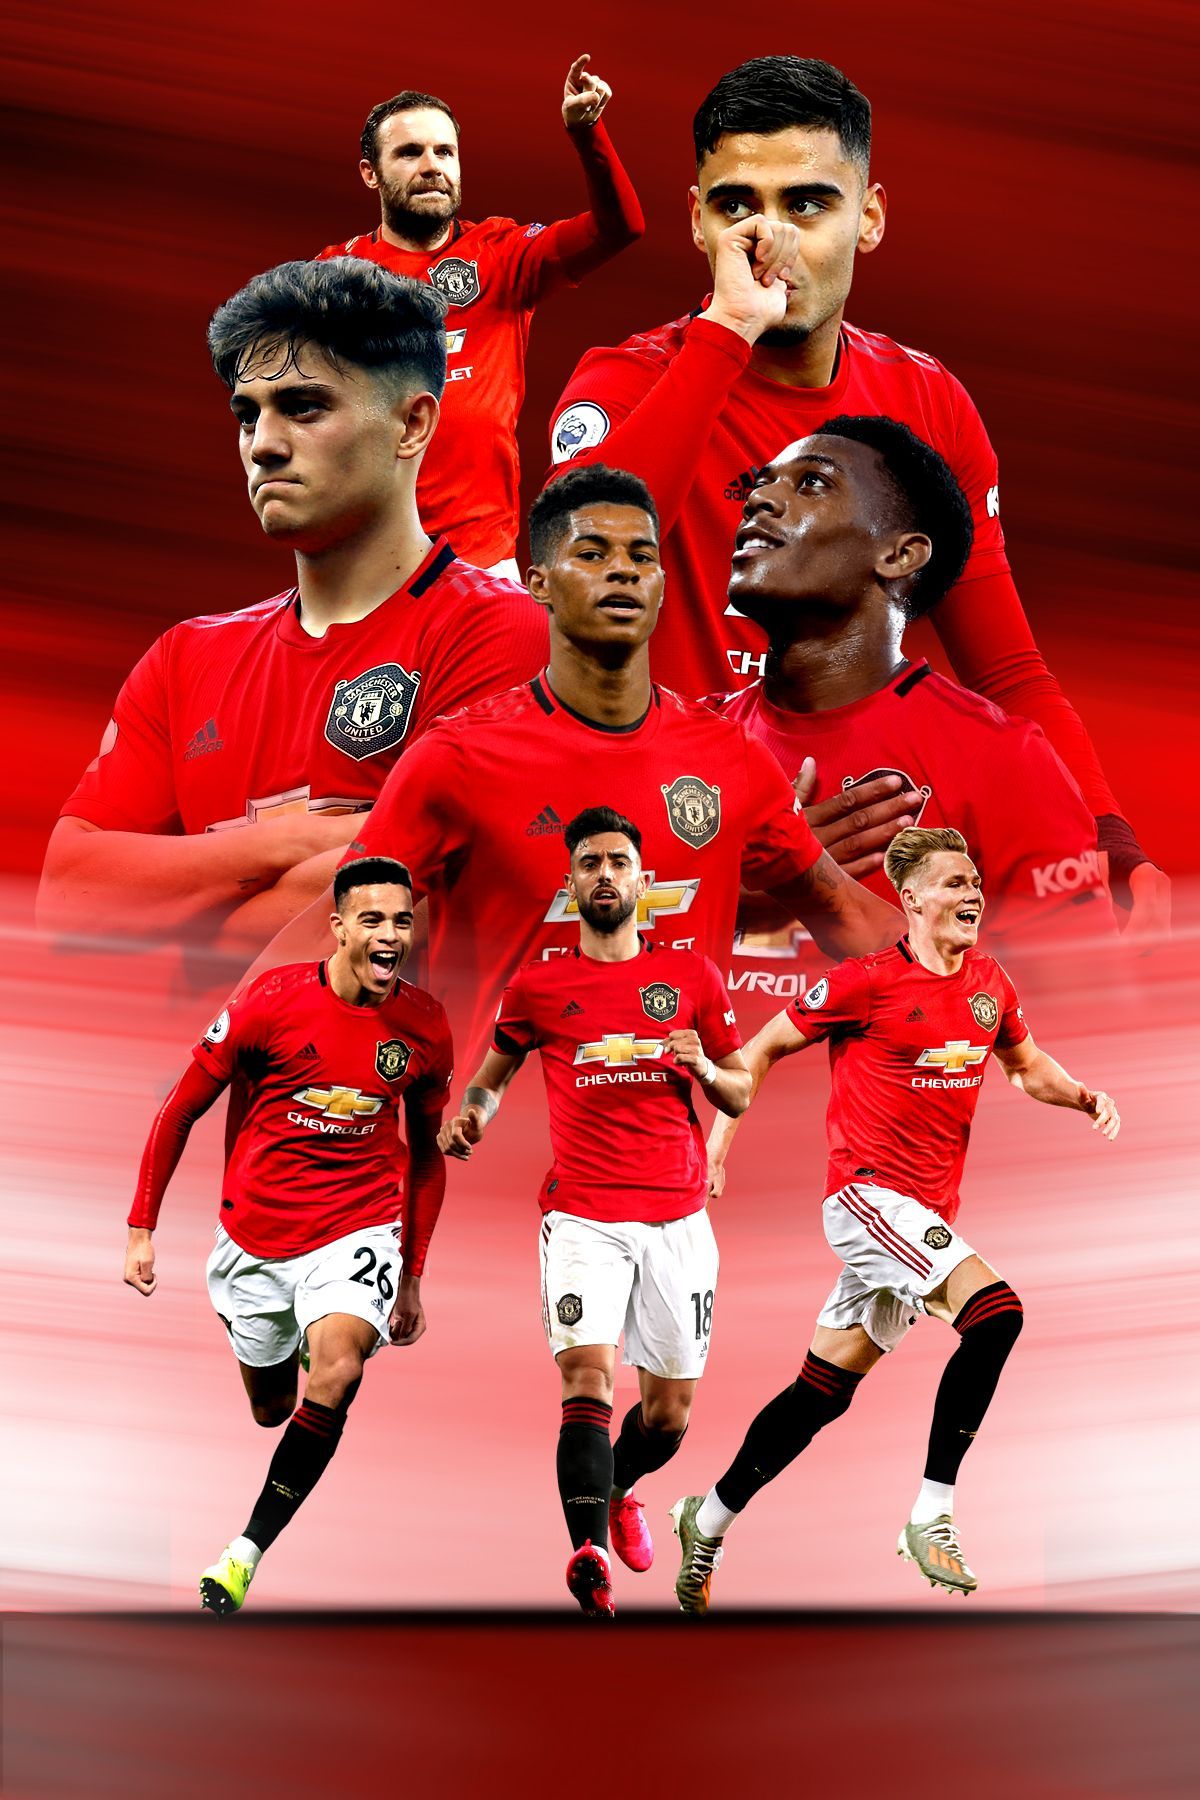 Manchester United. Manchester united wallpaper, Manchester united poster, Manchester united team